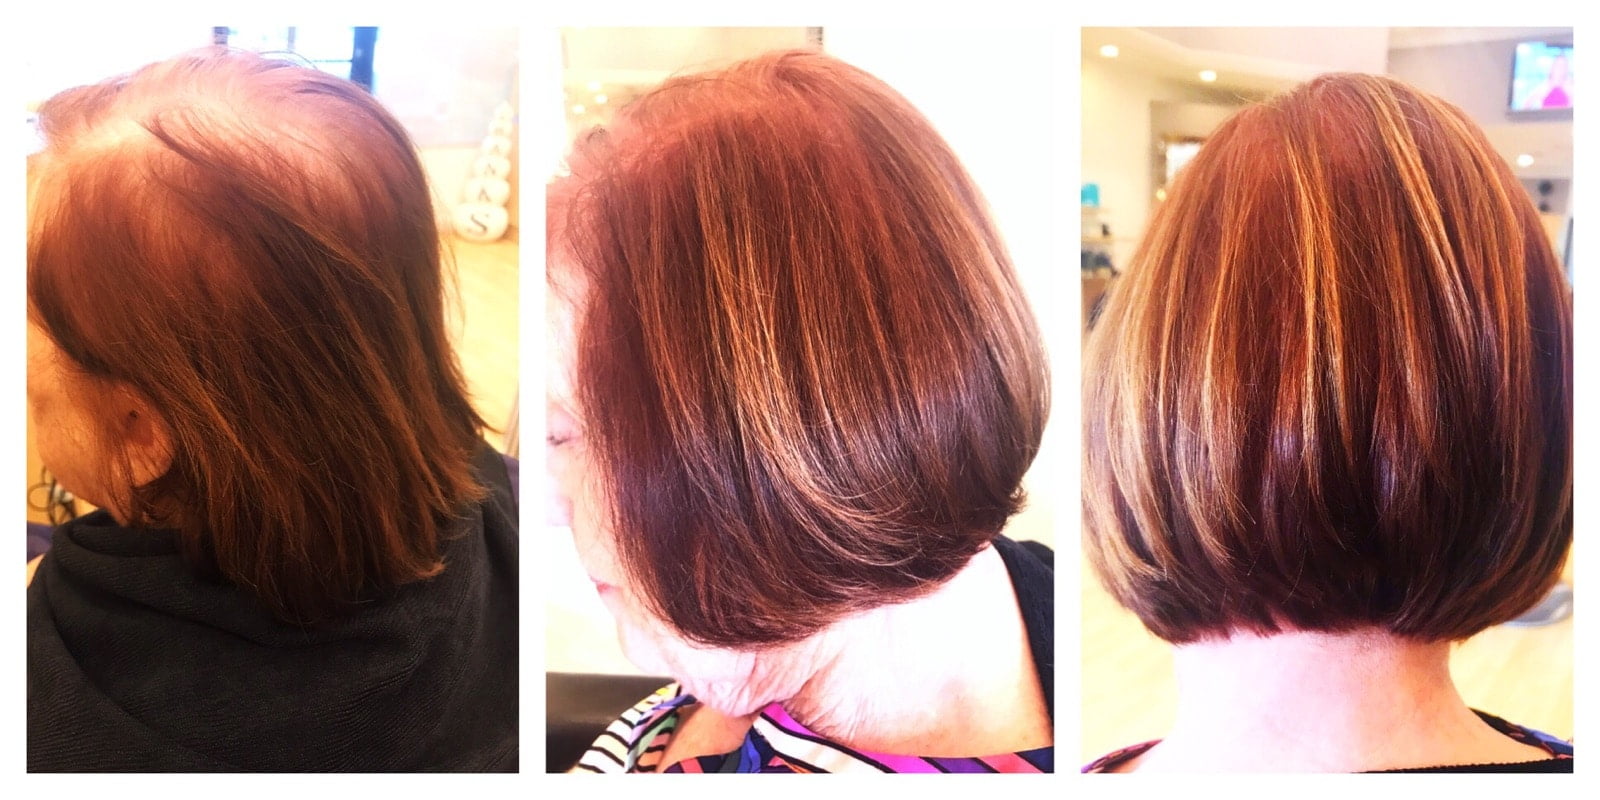 Full Color / Cut / Style